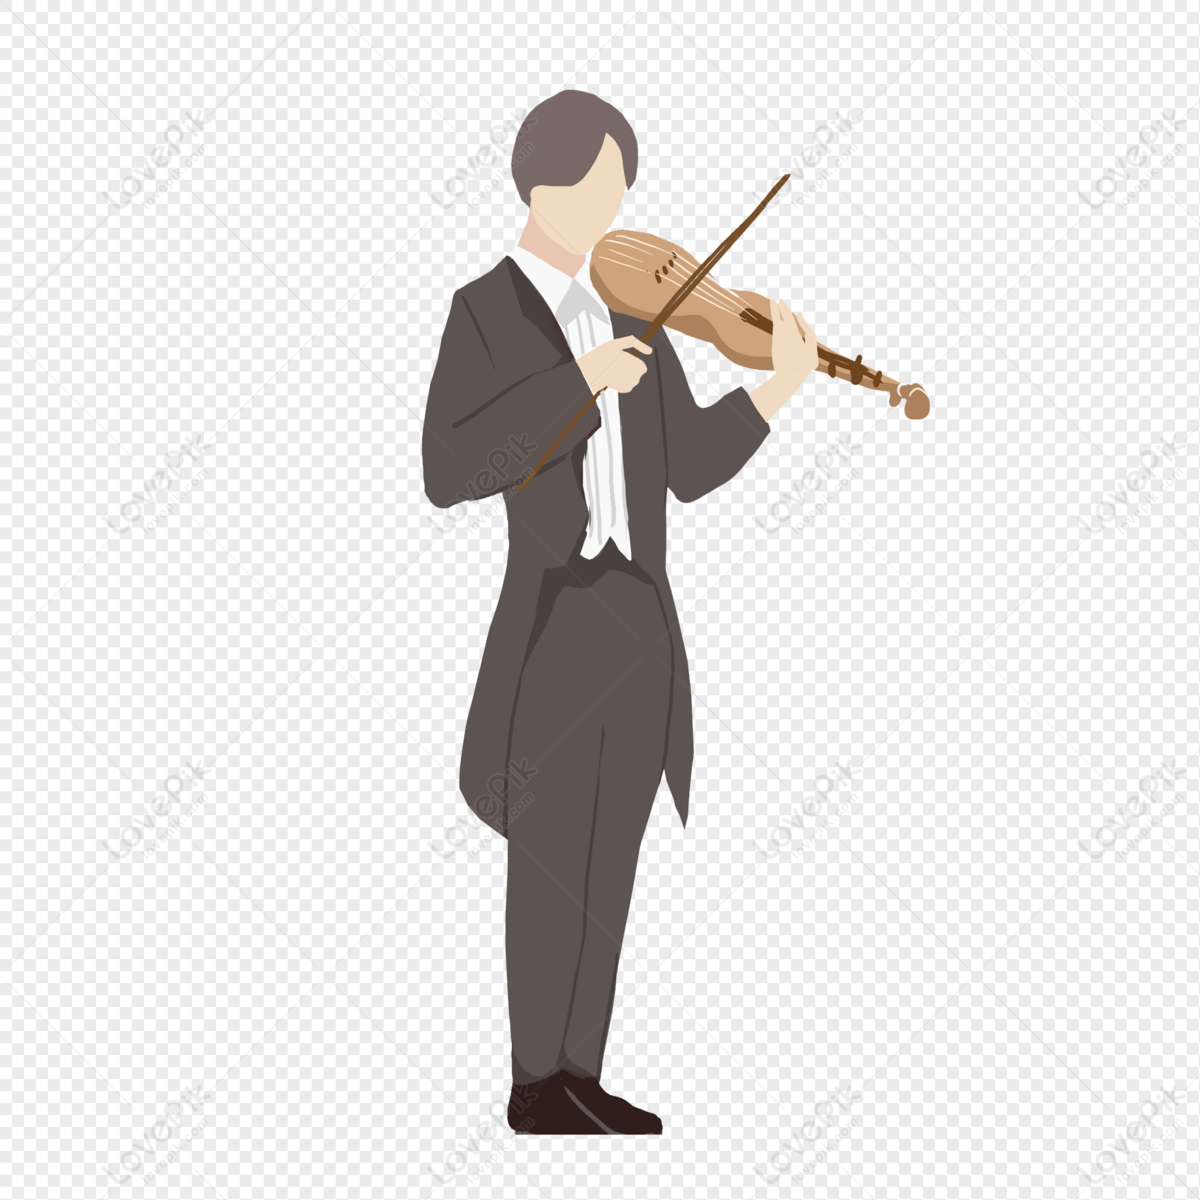 Music Festival Violin Cartoon Character PNG Image Free Download And Clipart  Image For Free Download - Lovepik | 401341291